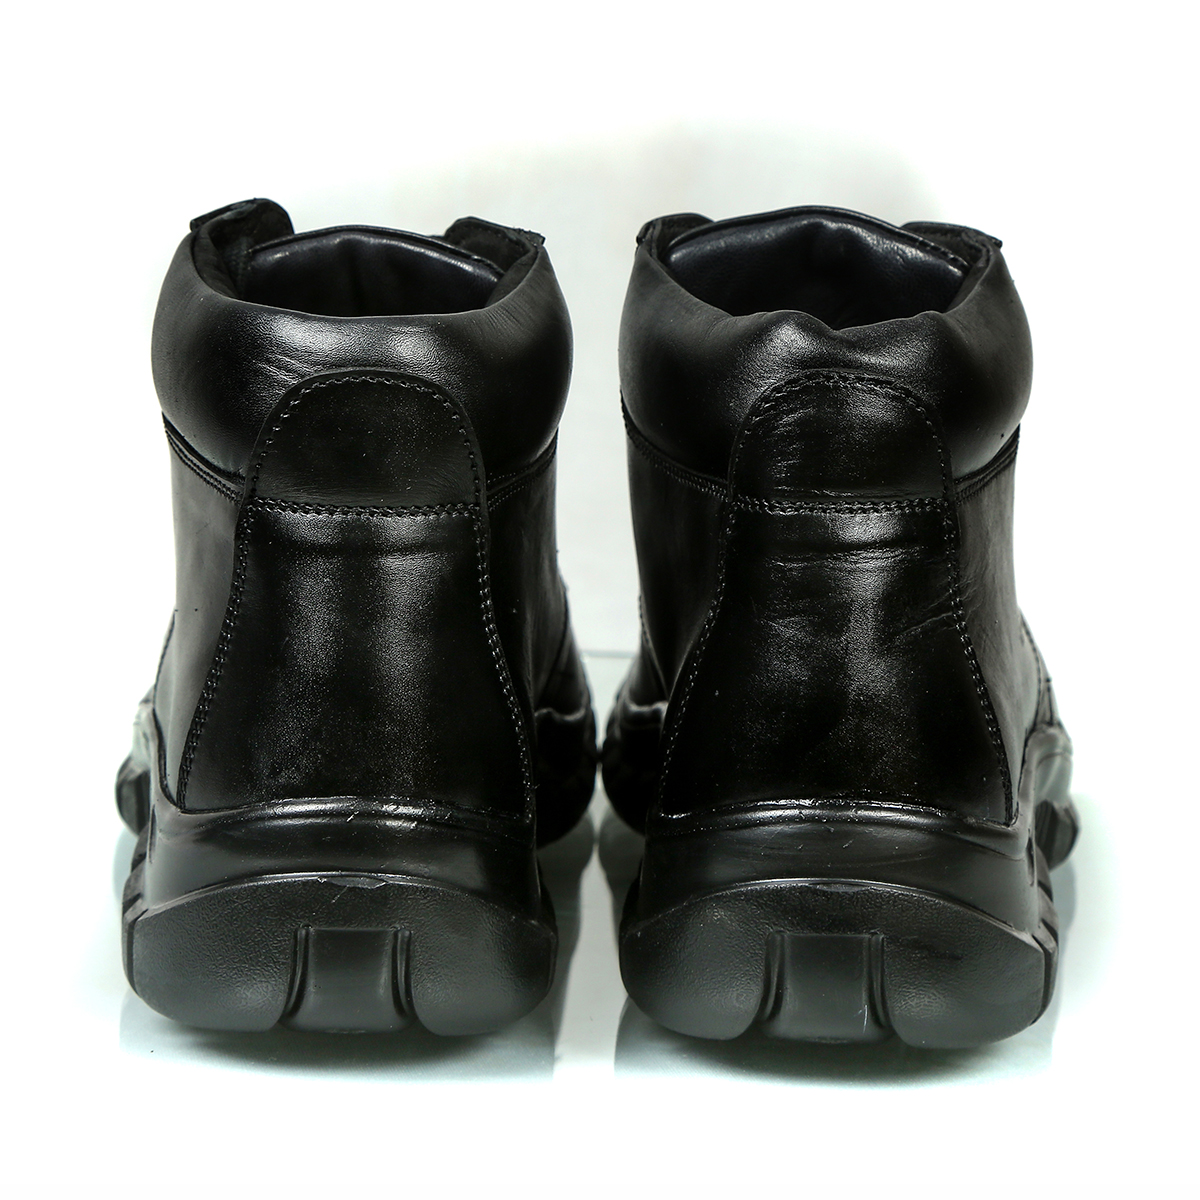 Dms Ankle Boots Manufacturers, Suppliers in Pune